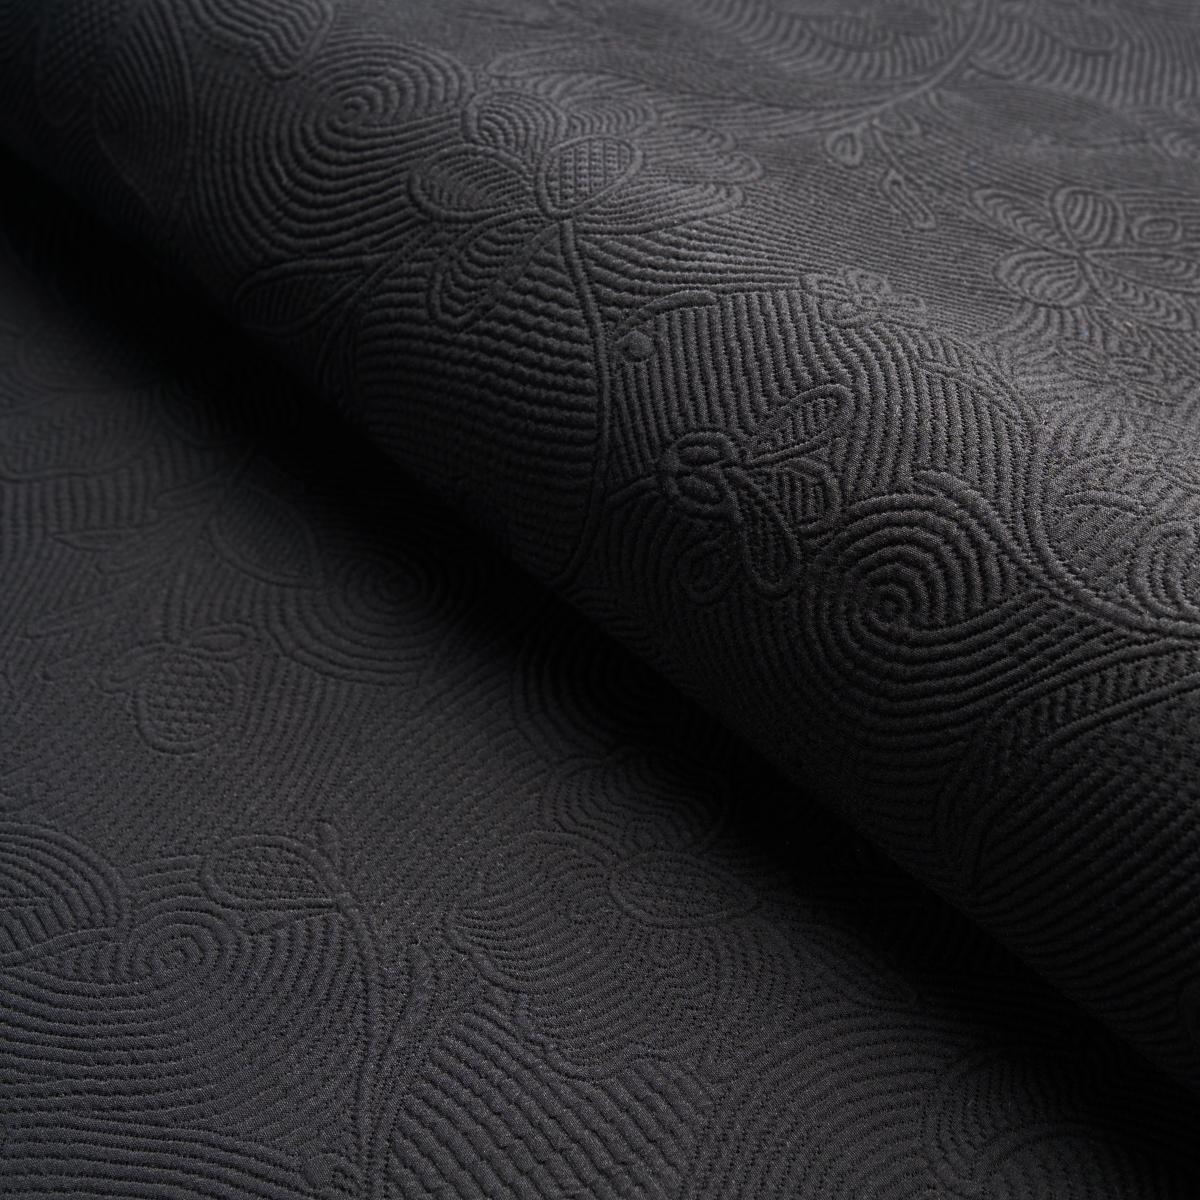 QUILTED SCROLL MATELASSÉ_PITCH BLACK